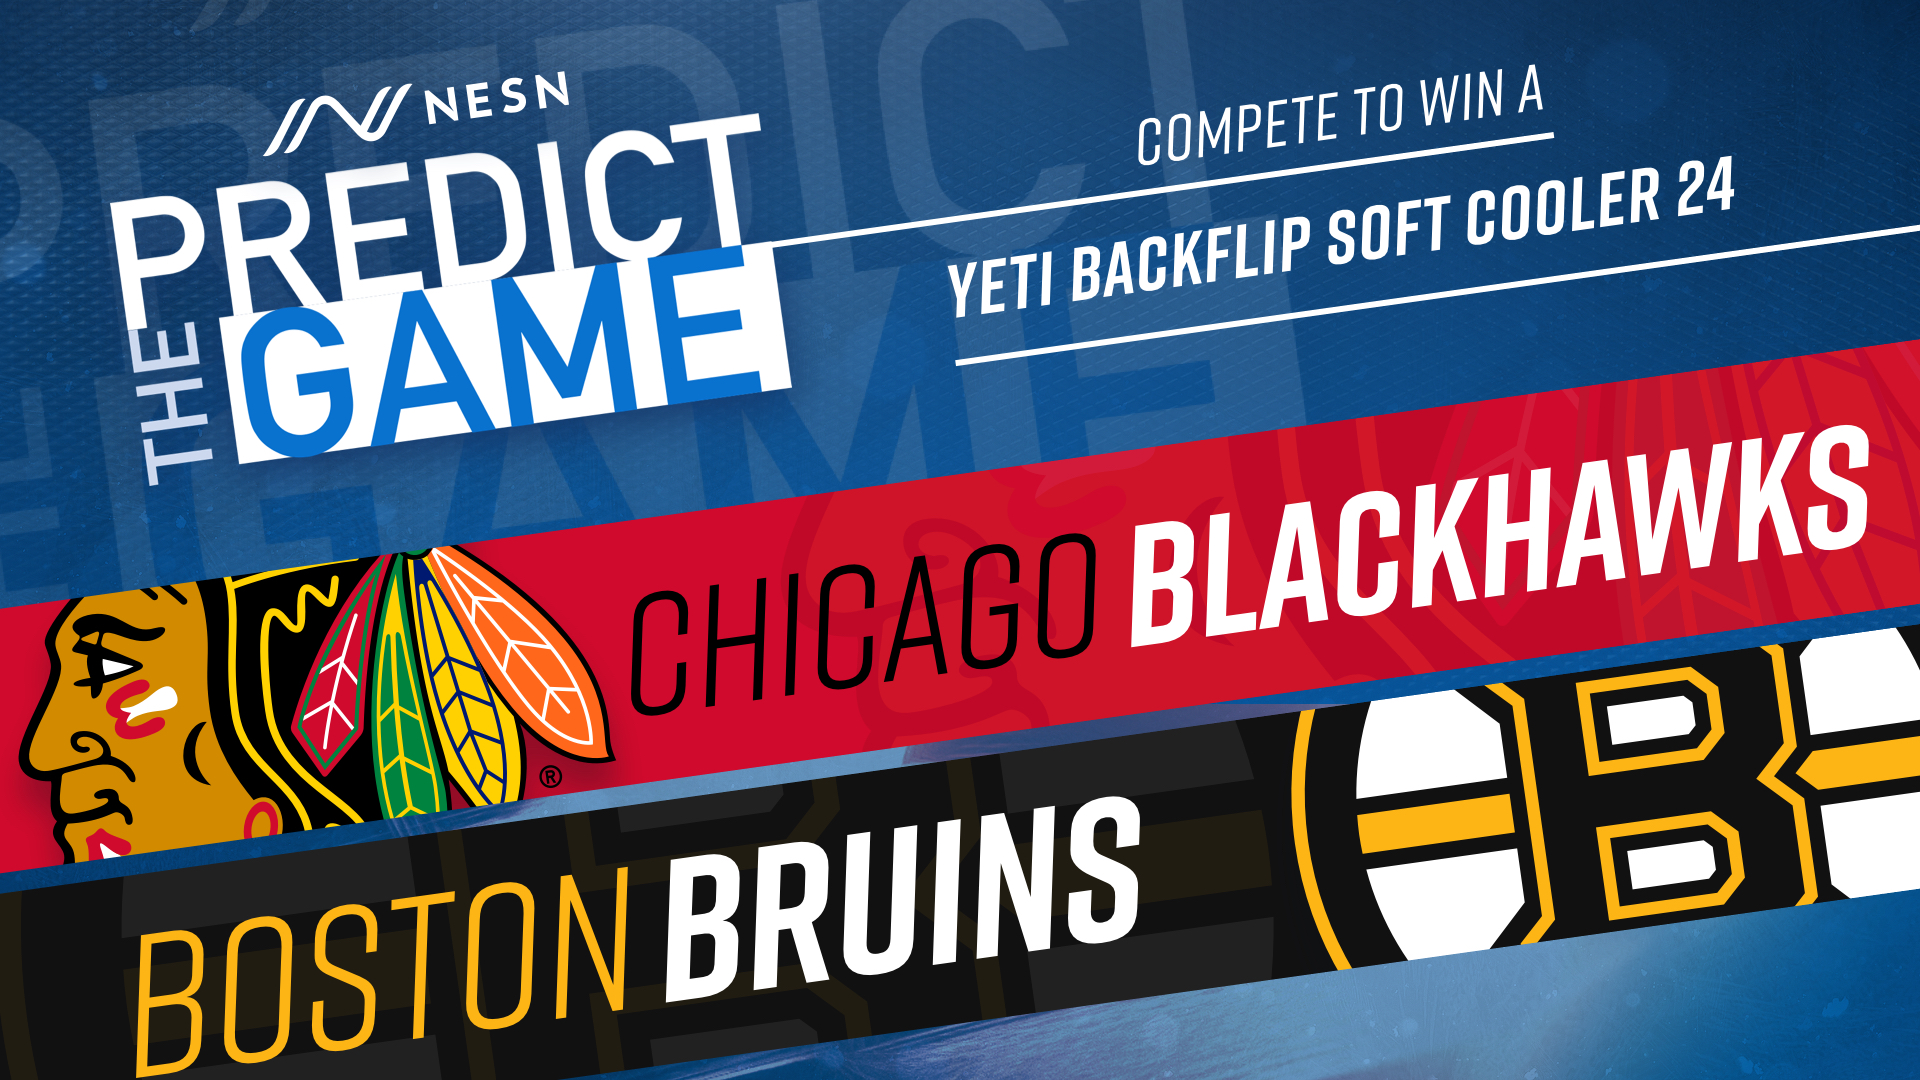 Play ‘Predict The Game’ During Bruins-Blackhawks To Win Yeti Cooler